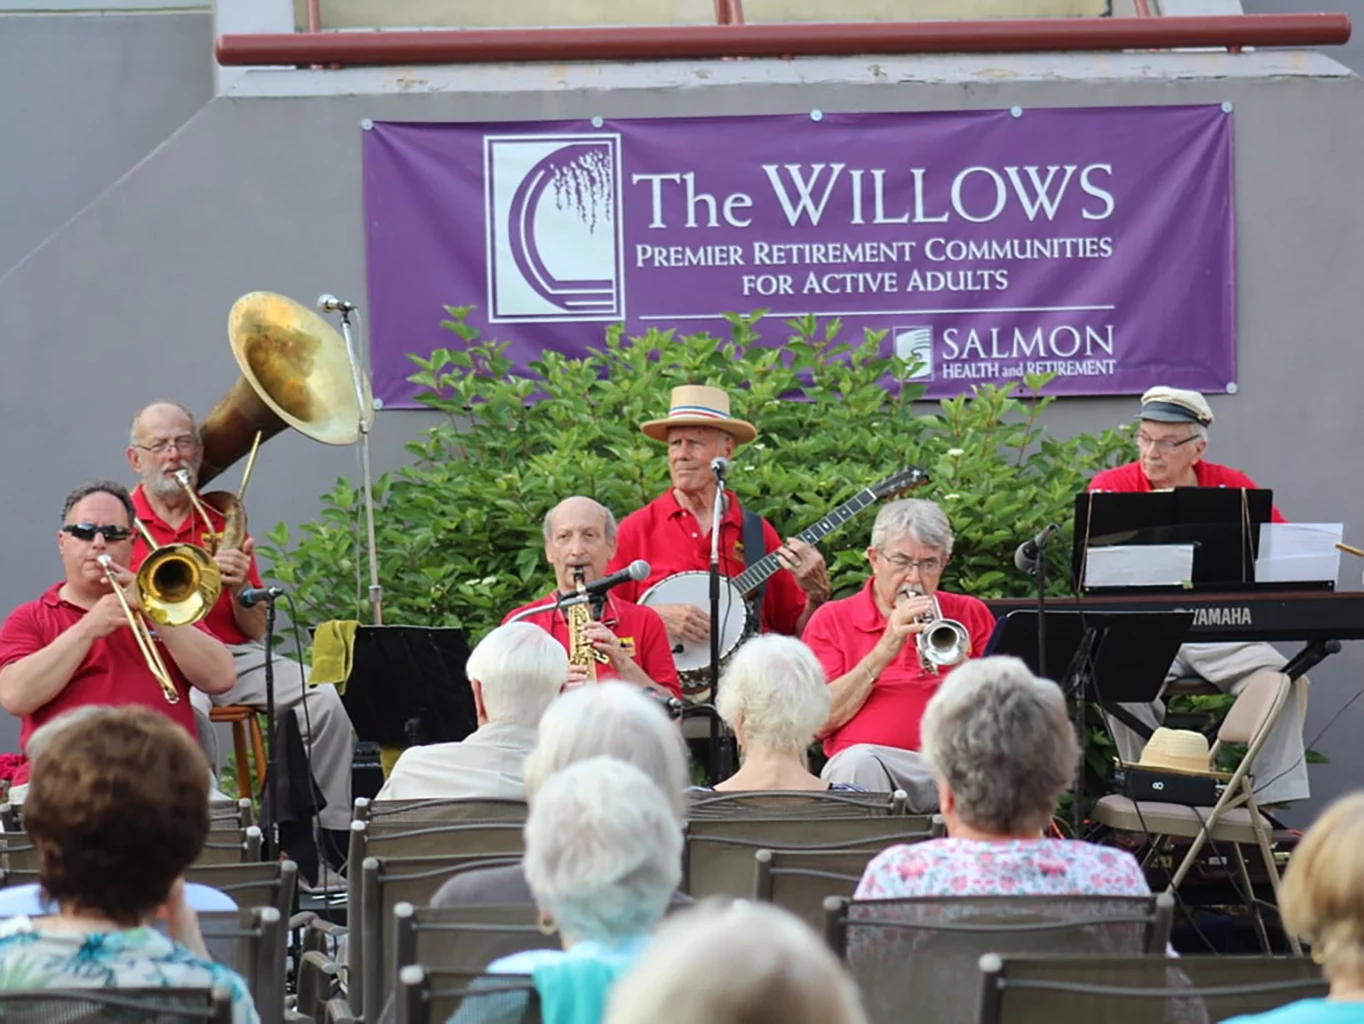 Band playing at The Willows featured in Community Advocate